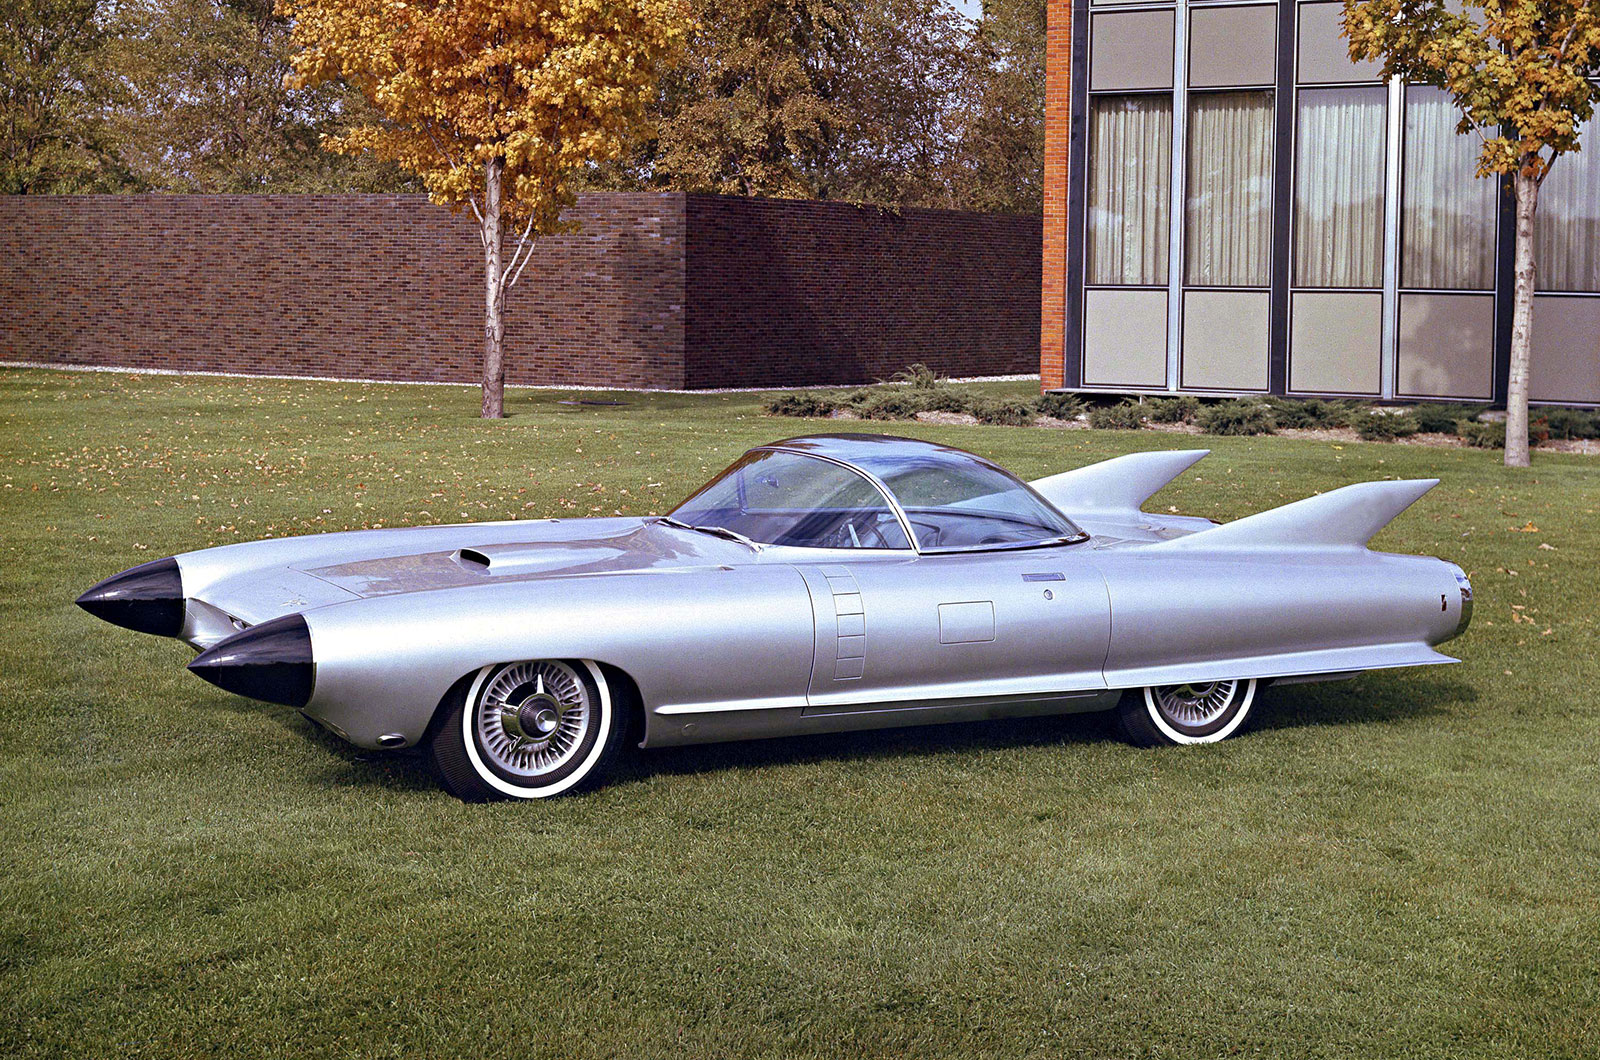 <p>Few cars can make the iconic 1959 Cadillac appear low-key, but the Cyclone of the same year gave it a pretty good go. Those black cones in the nose were equipped with radar to help the Cyclone’s driver avoid anything in the way, while the cockpit was protected by a single-piece plastic canopy coated with vapourised silver to deflect the sun’s rays.</p>